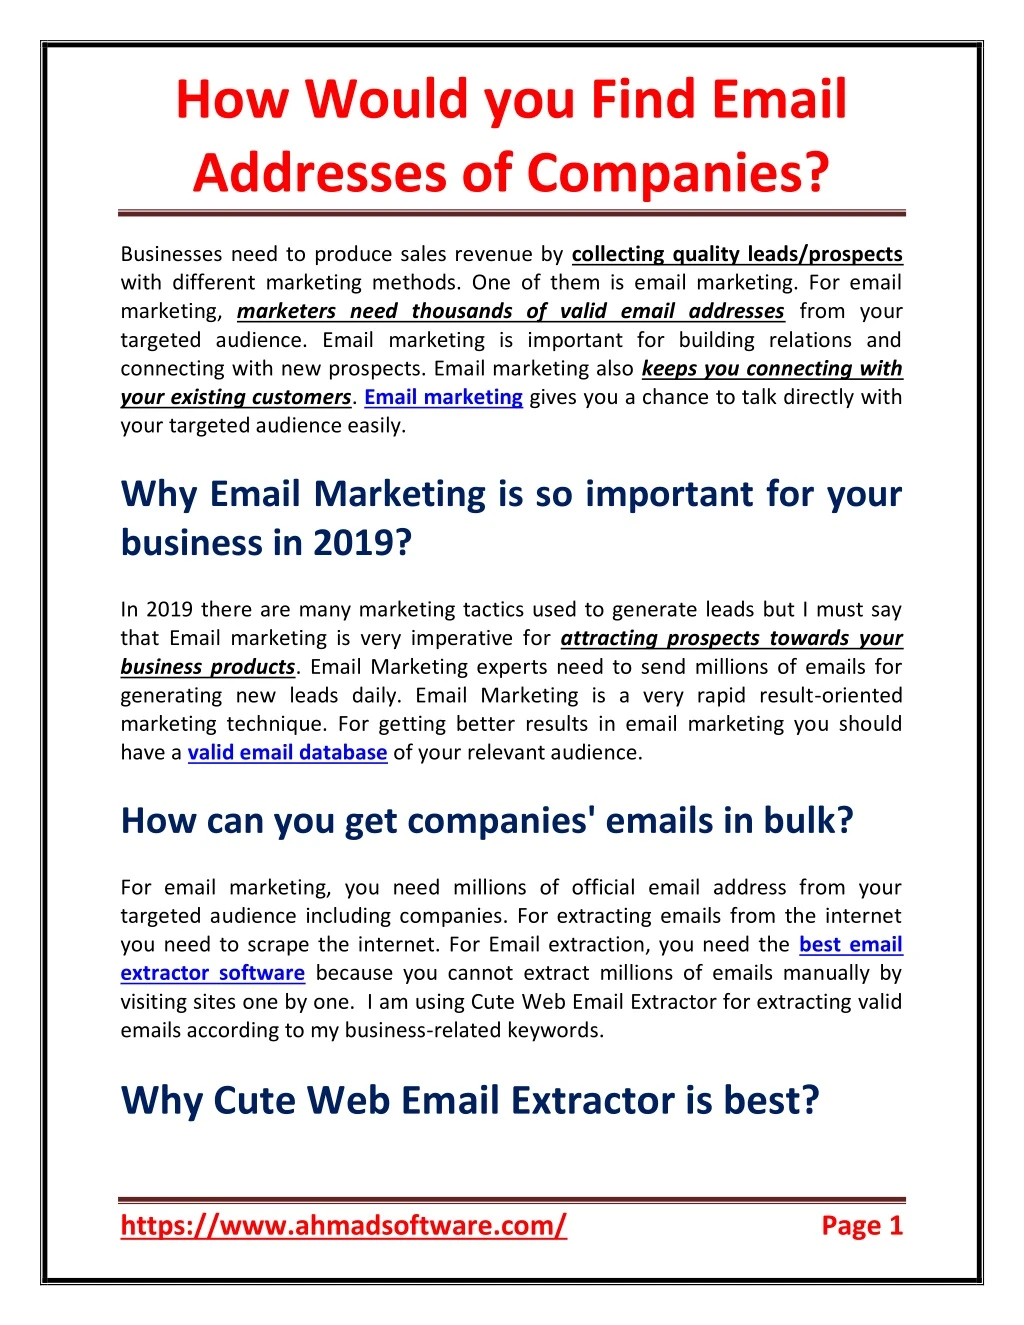 how would you find email addresses of companies